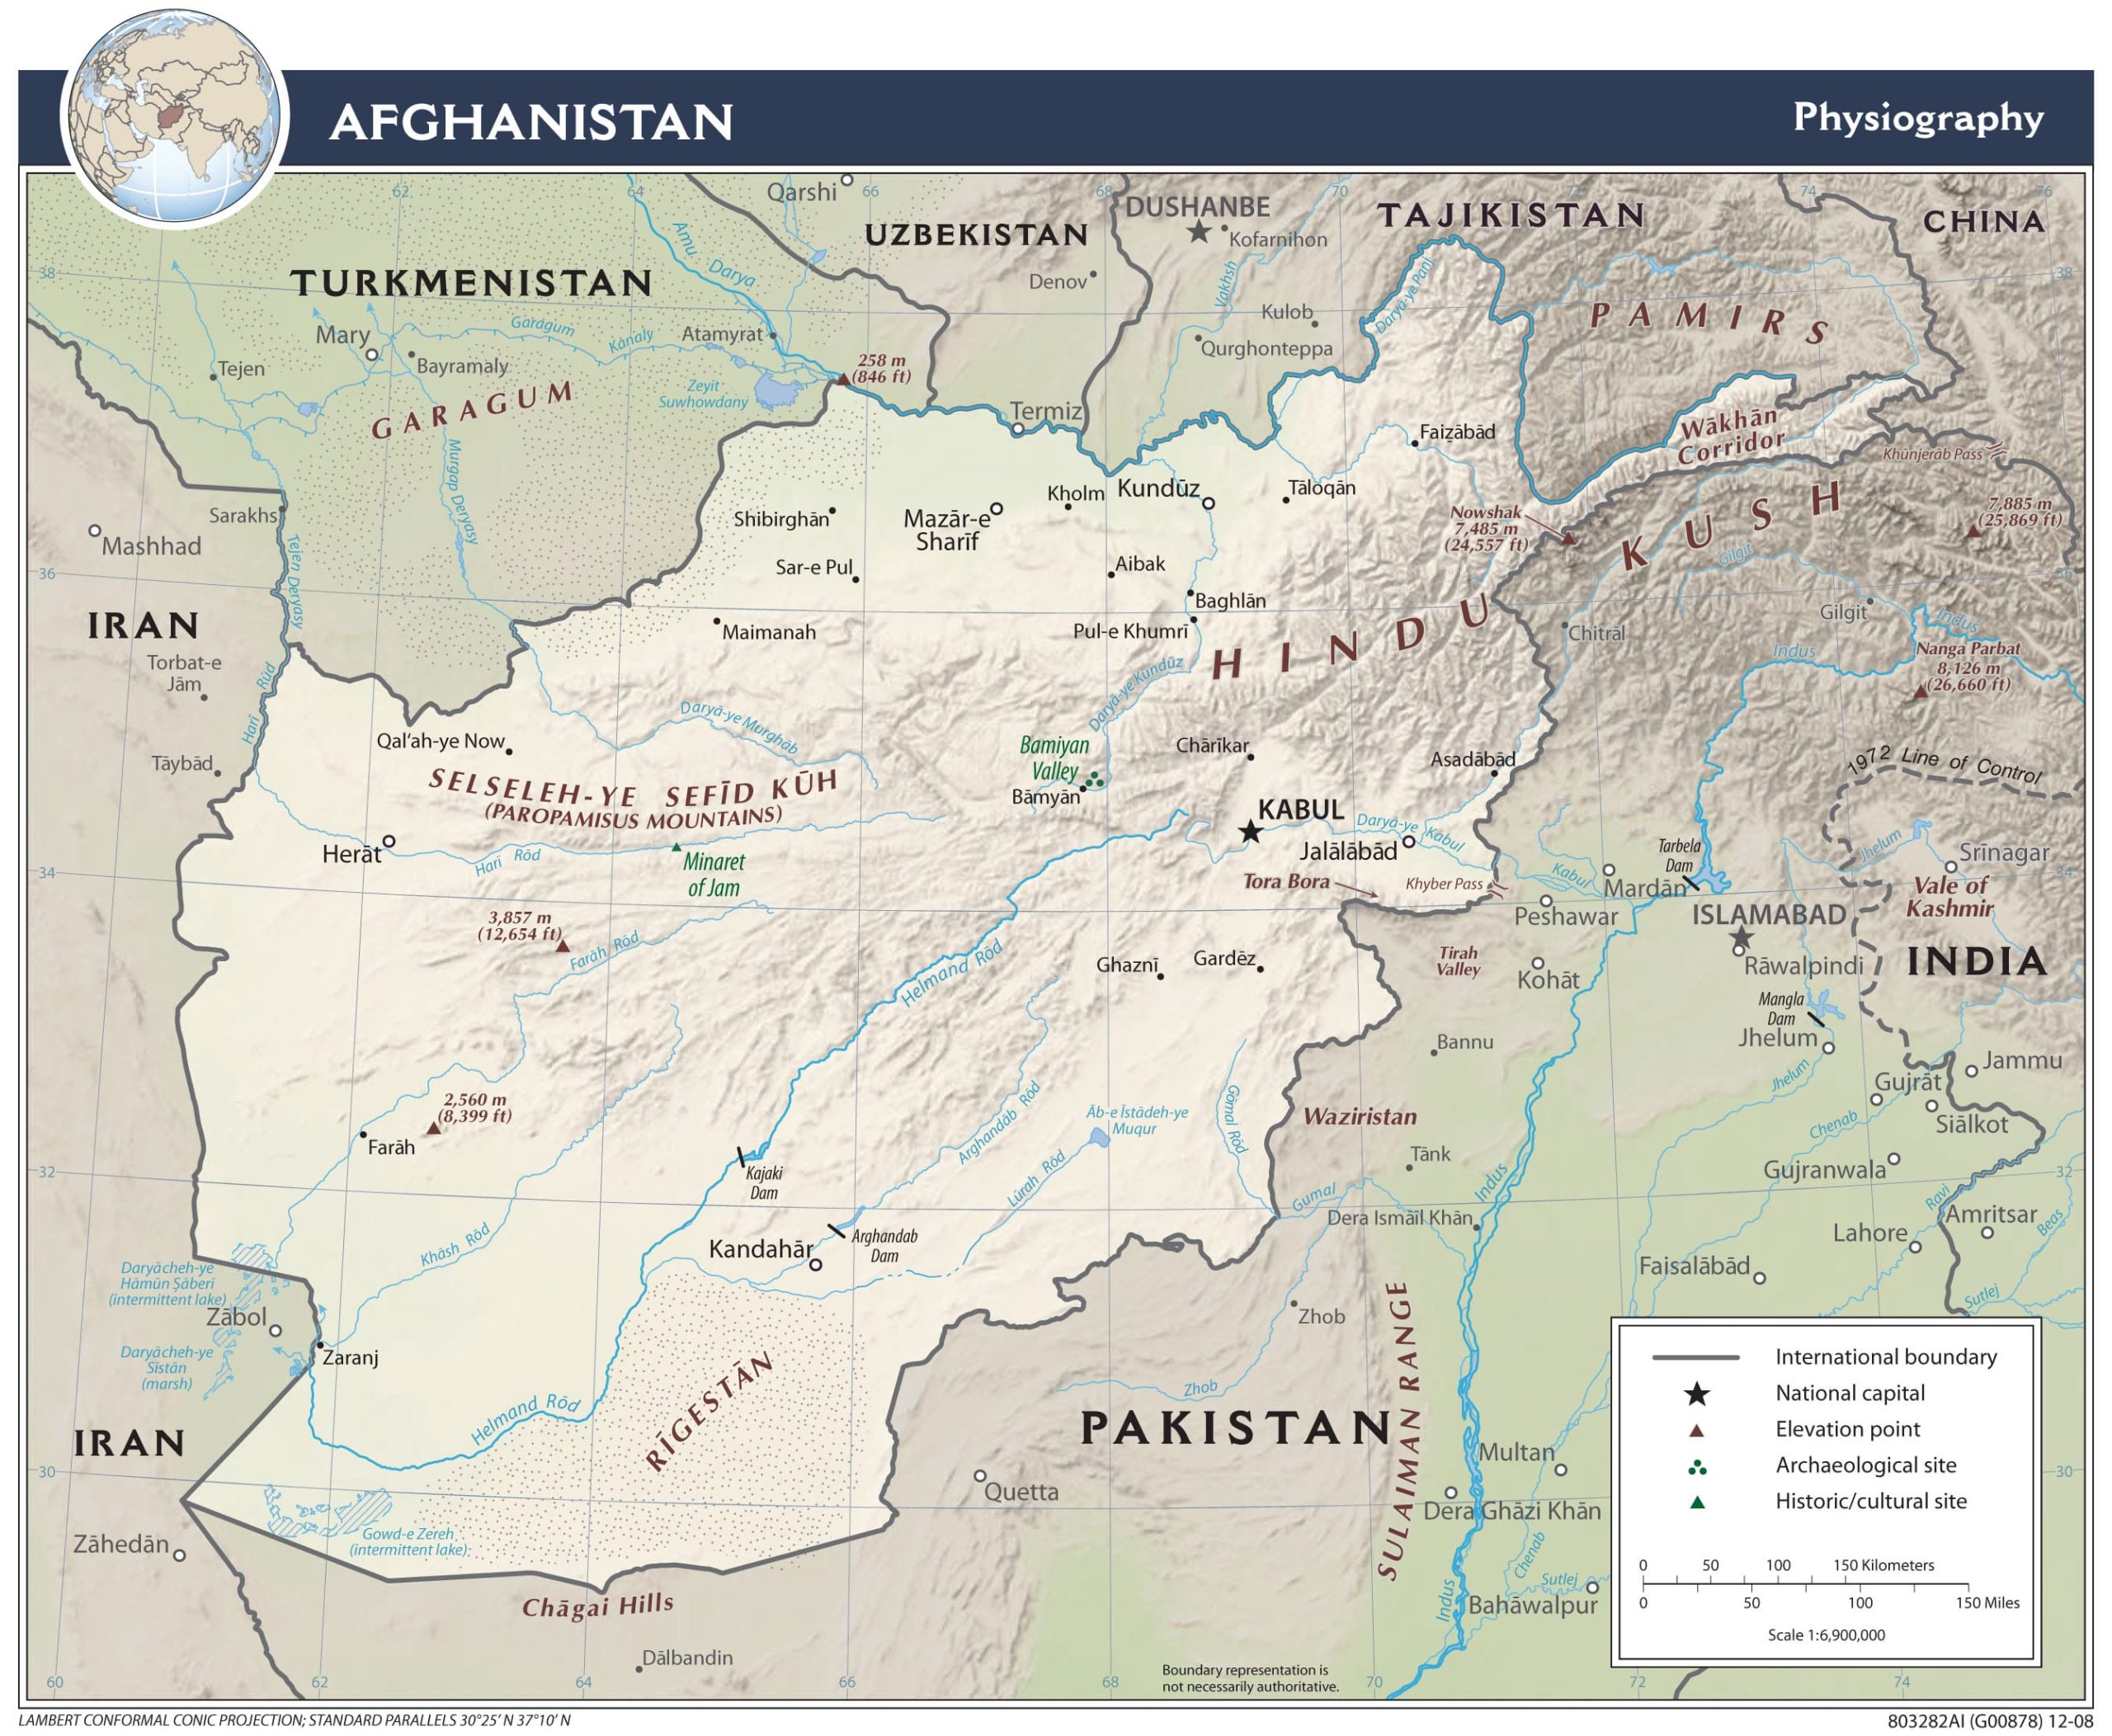 Detailed map of Afghanistan, highlighting major cities, roads, and geographical features